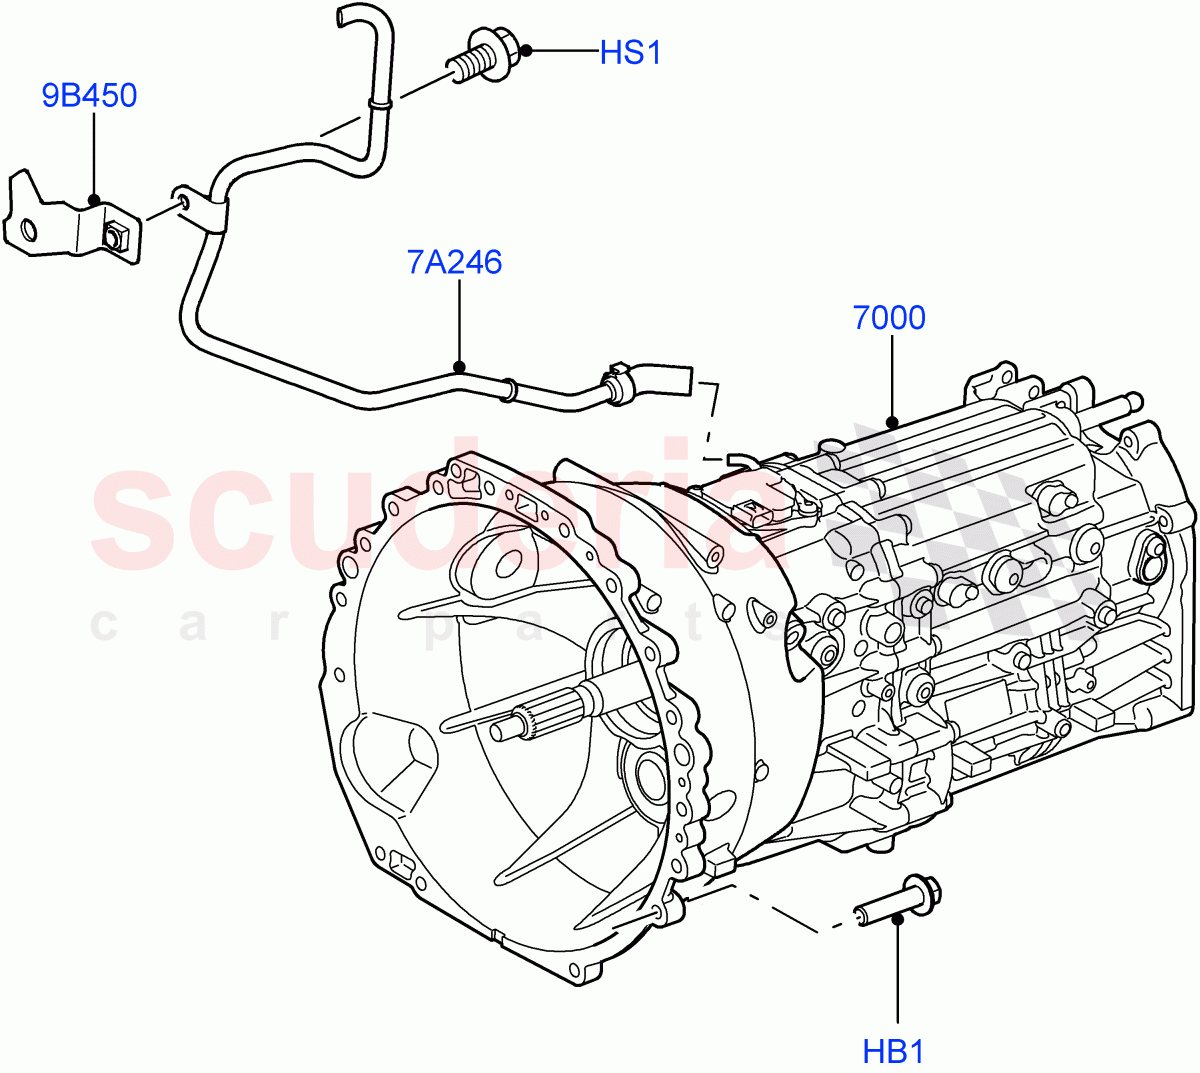 Manual Transaxle And Case(6 Speed Man ZF S6-53)((V)FROMAA000001,(V)TOBA999999) of Land Rover Land Rover Discovery 4 (2010-2016) [3.0 DOHC GDI SC V6 Petrol]